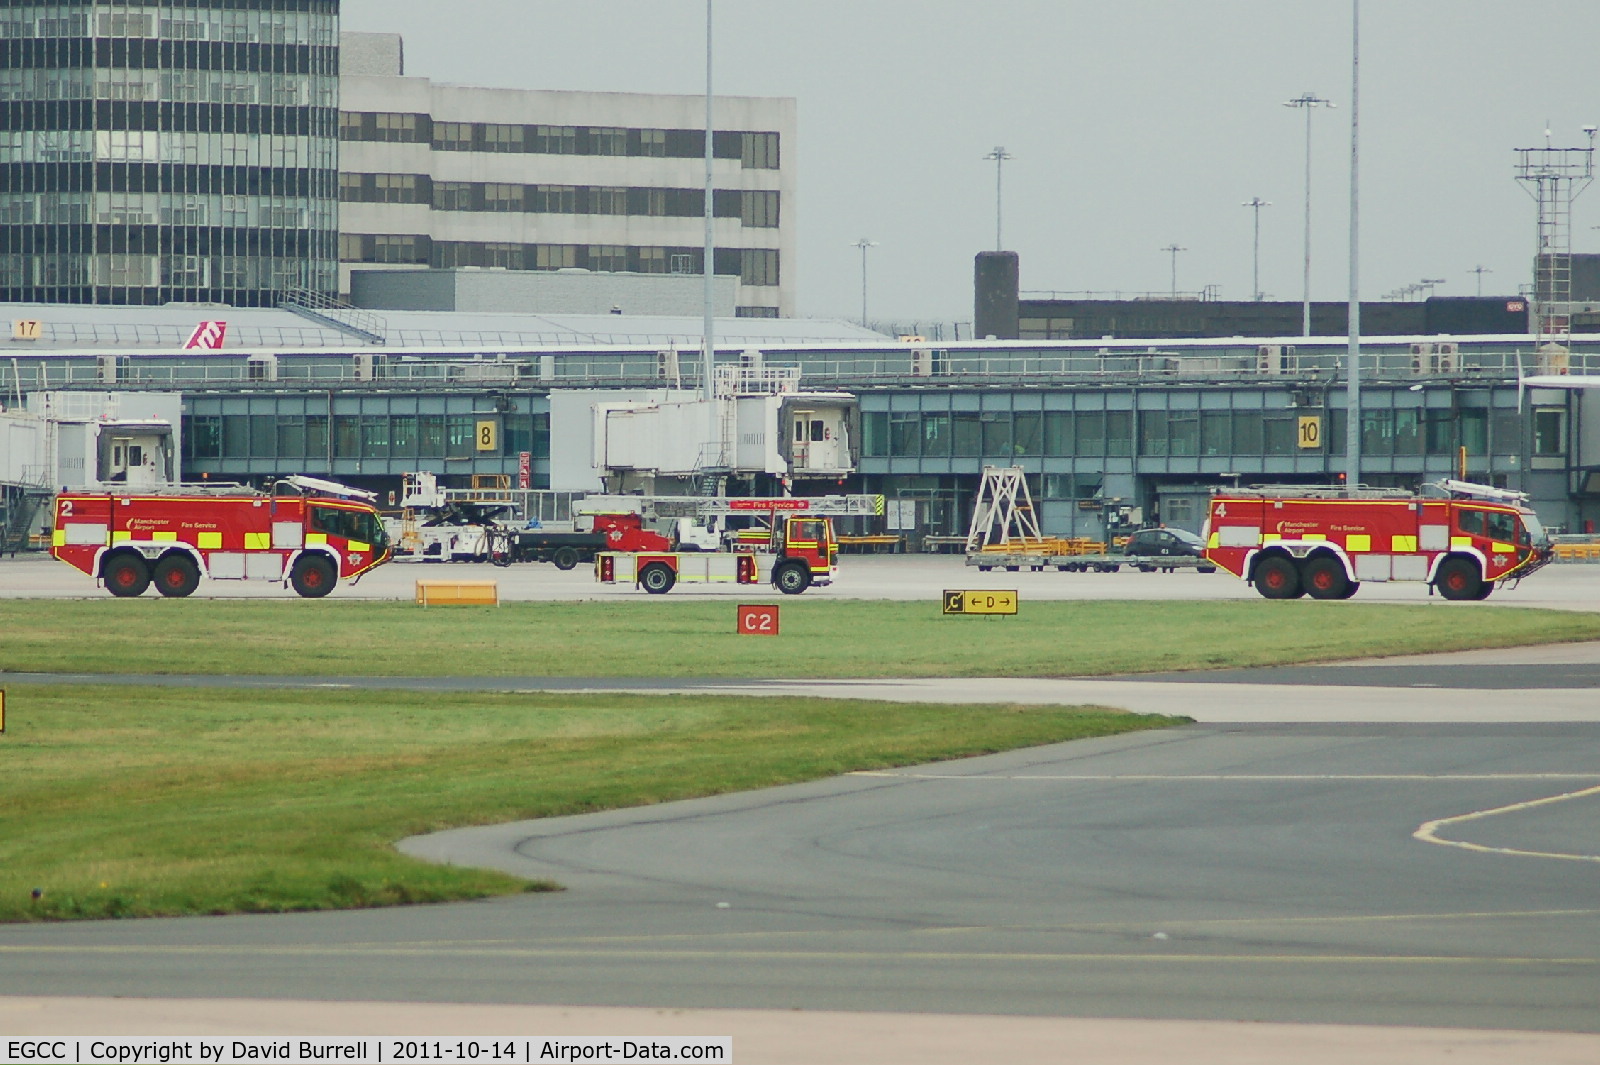 Manchester Airport, Manchester, England United Kingdom (EGCC) - Manchester Airport Fire Service Convoy.